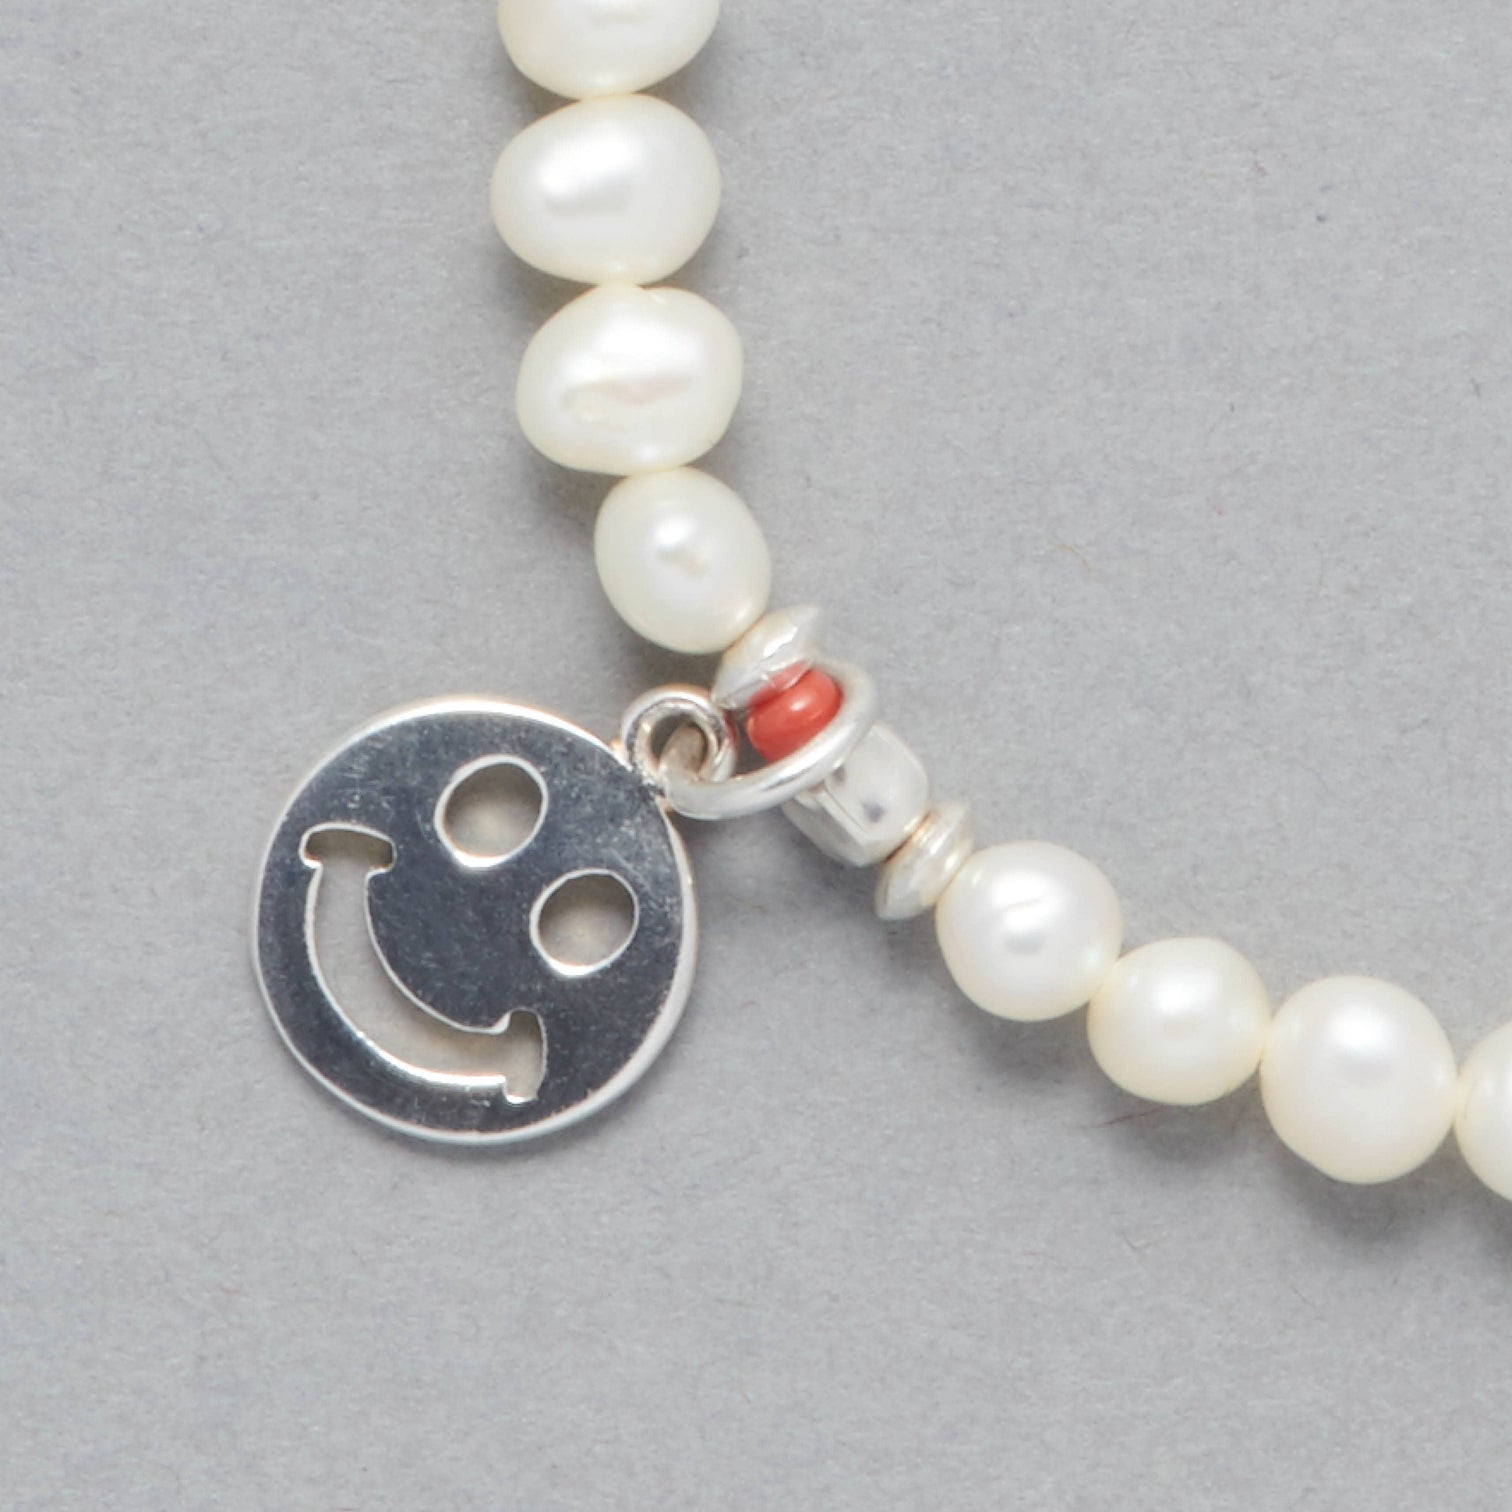 ALAIA Bracelet, close-up of the Smiley Sterling Silver Charm, the Freshwater White Pearls and the touch of Coral. 